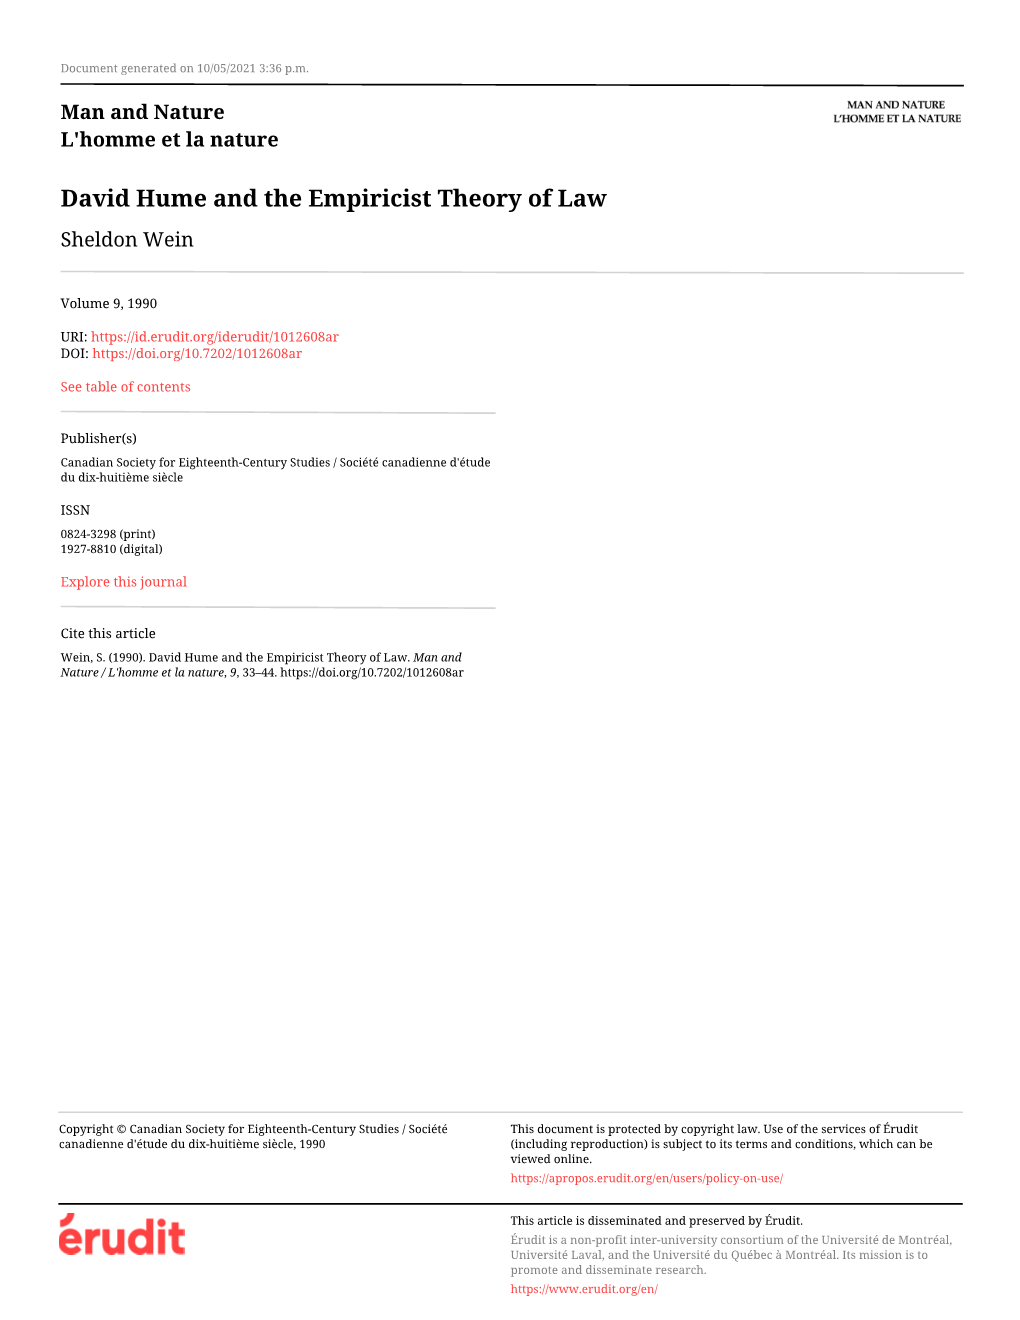 David Hume and the Empiricist Theory of Law Sheldon Wein